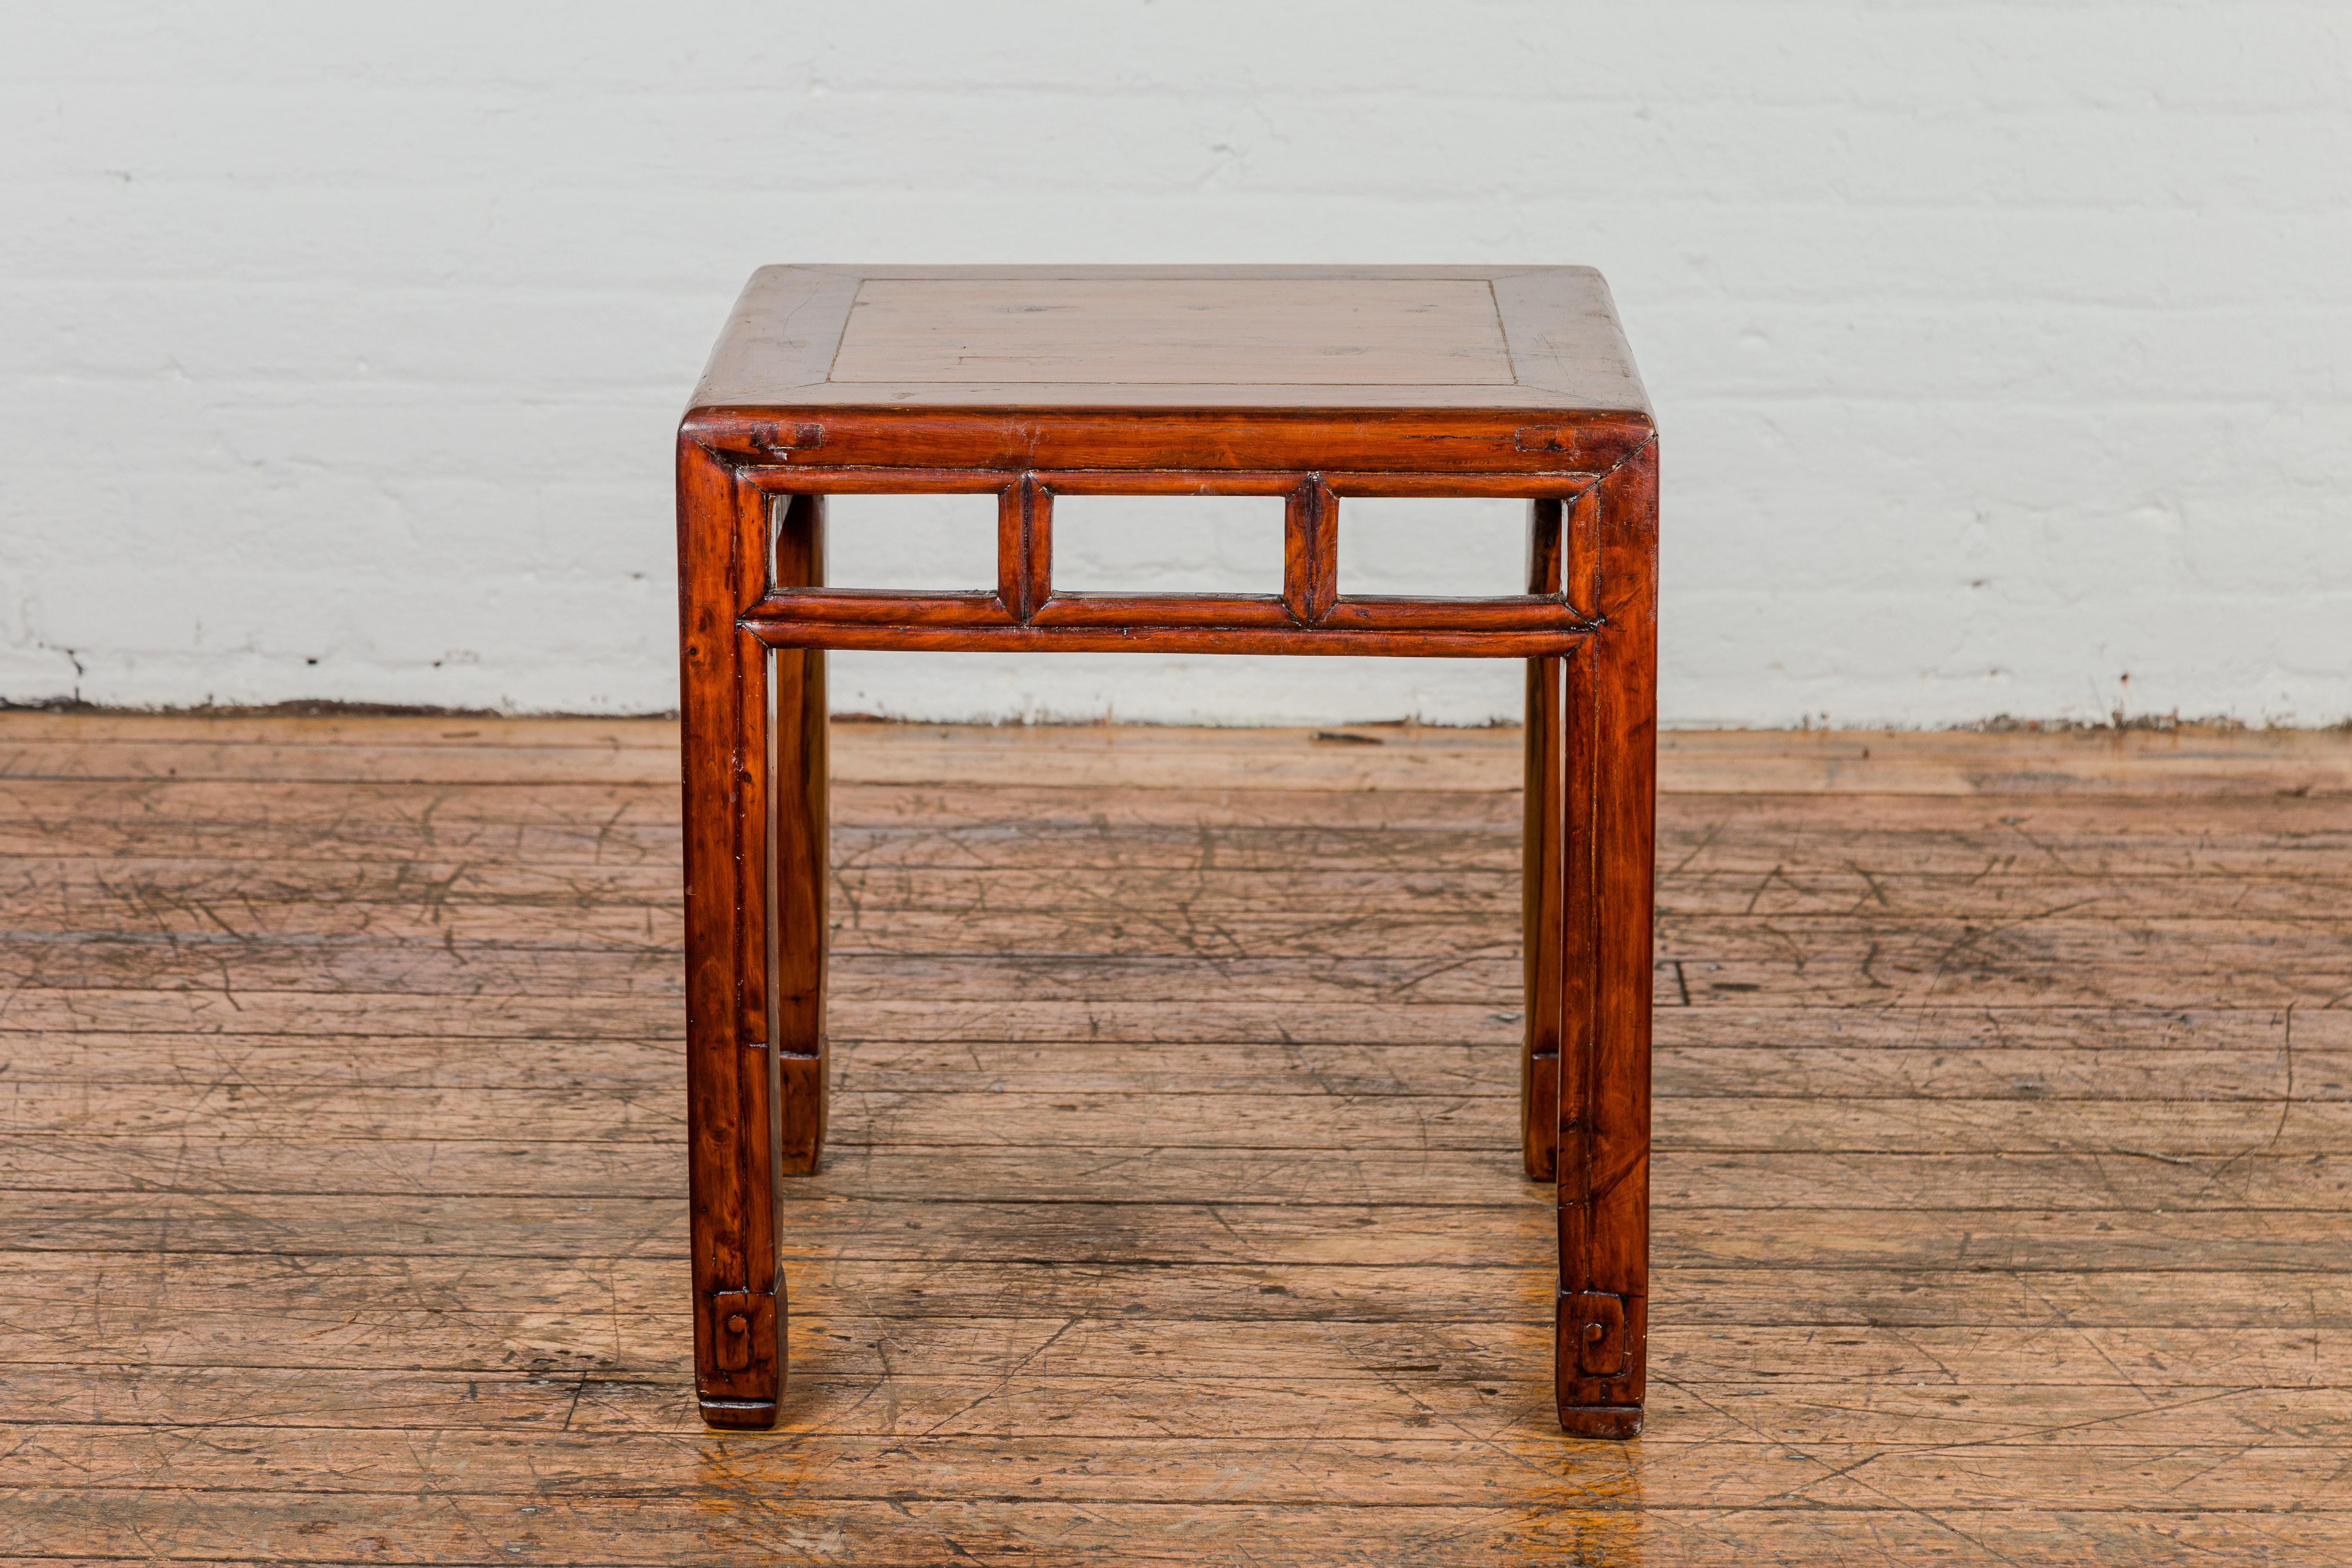 Late Qing Dynasty Period Side Table with Pillar Strut Motifs and Scroll Feet For Sale 7